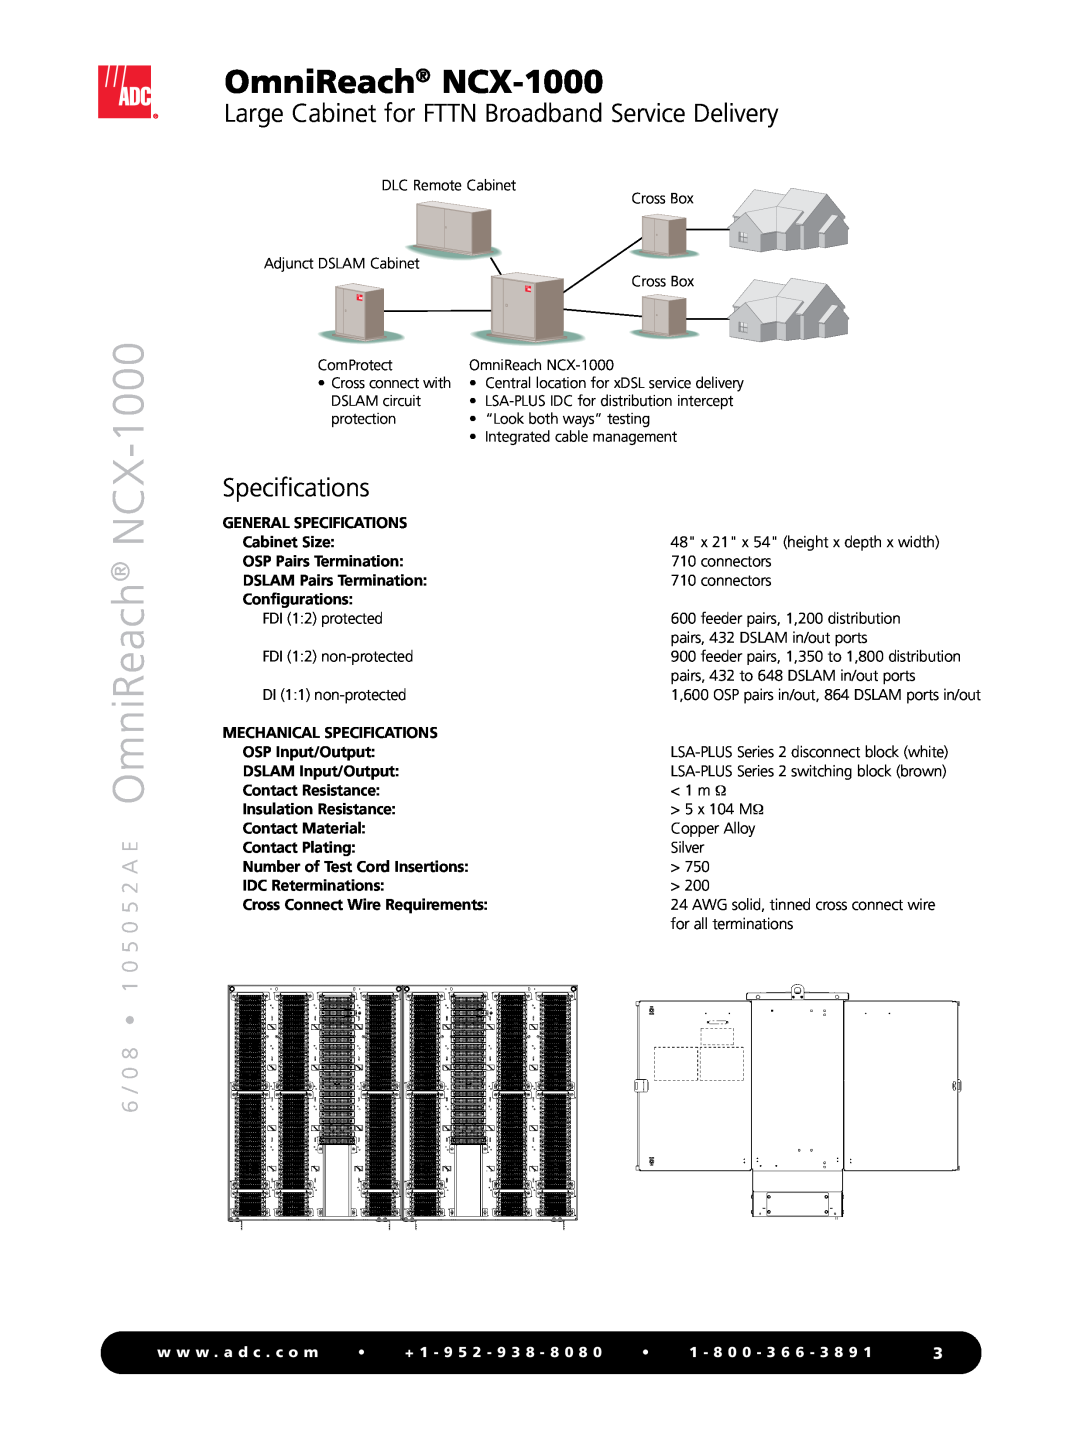 ADC manual Specifications, 6 / 0 8 1 0 5 0 5 2 A E OmniReach NCX-1000, Large Cabinet for FTTN Broadband Service Delivery 